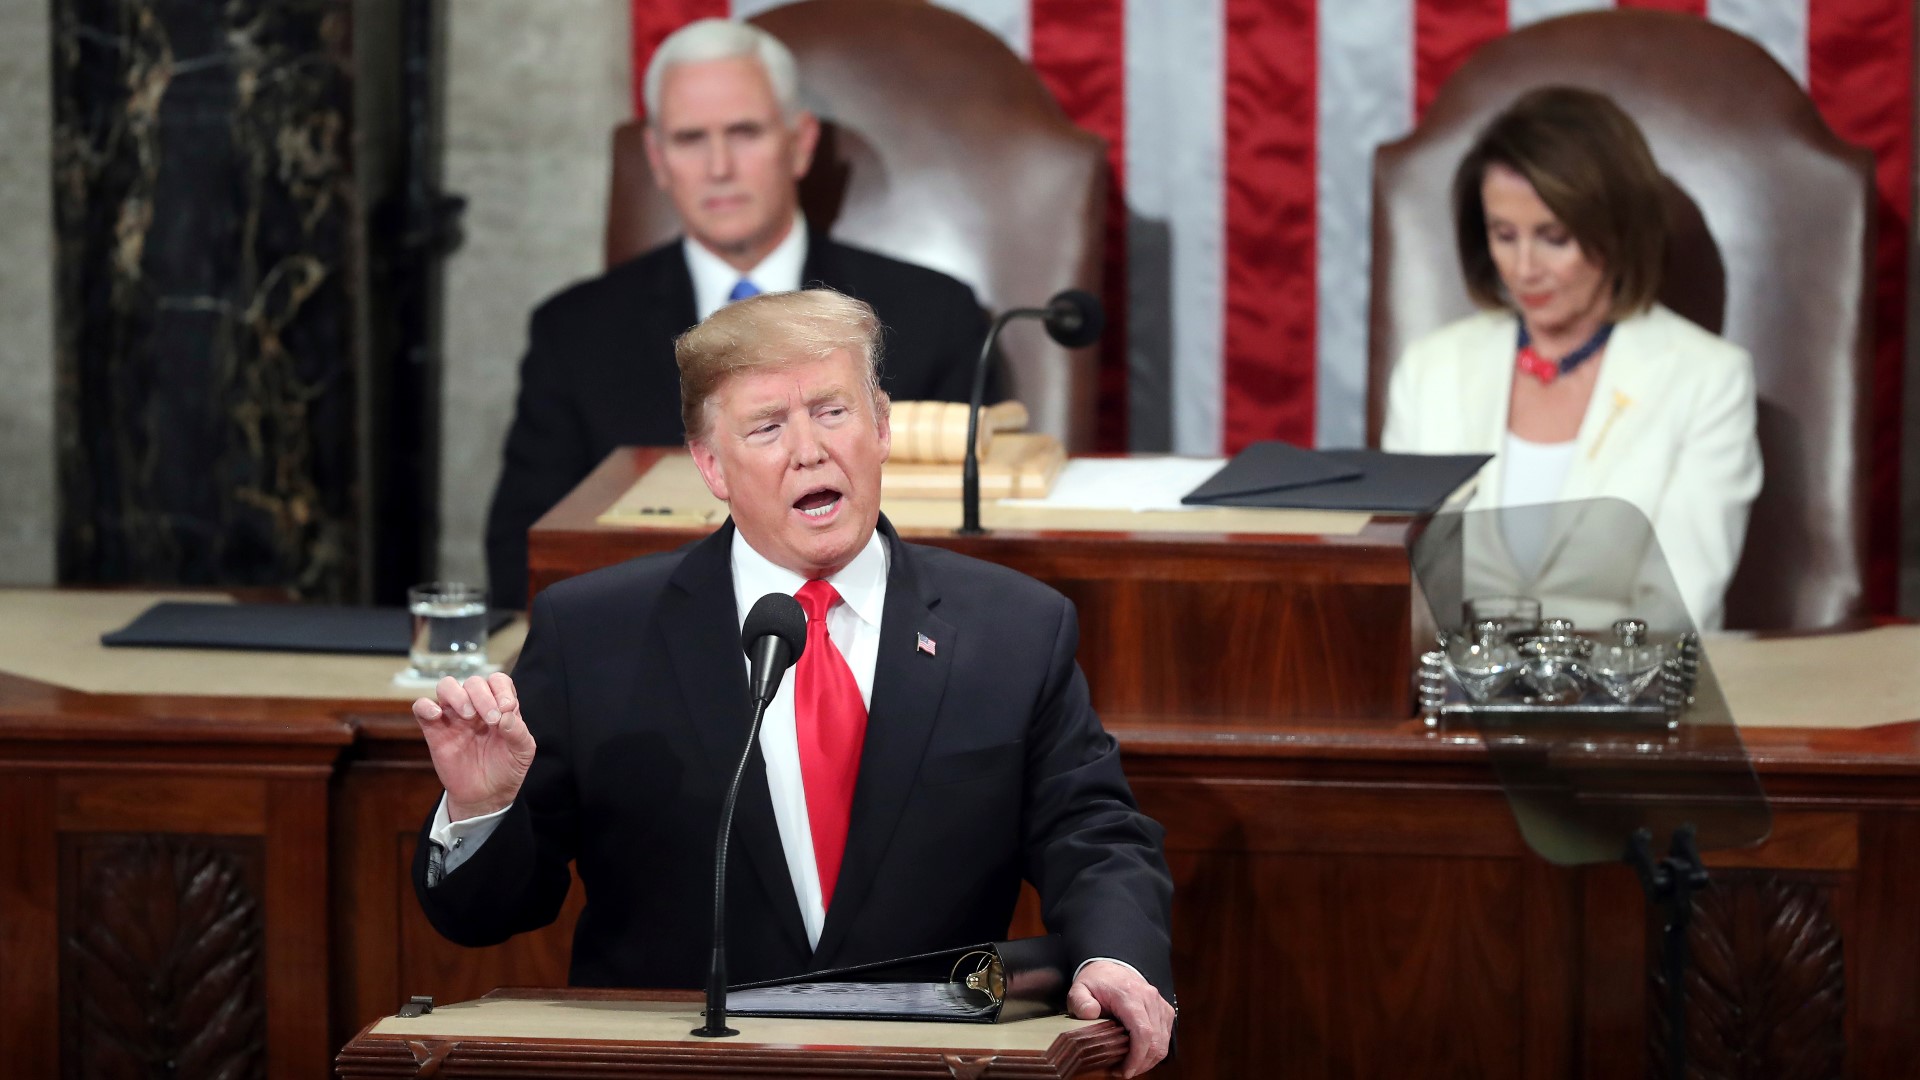 Chris Rogers fact checks three claims made by President Trump during the 2019 State of the Union Address.